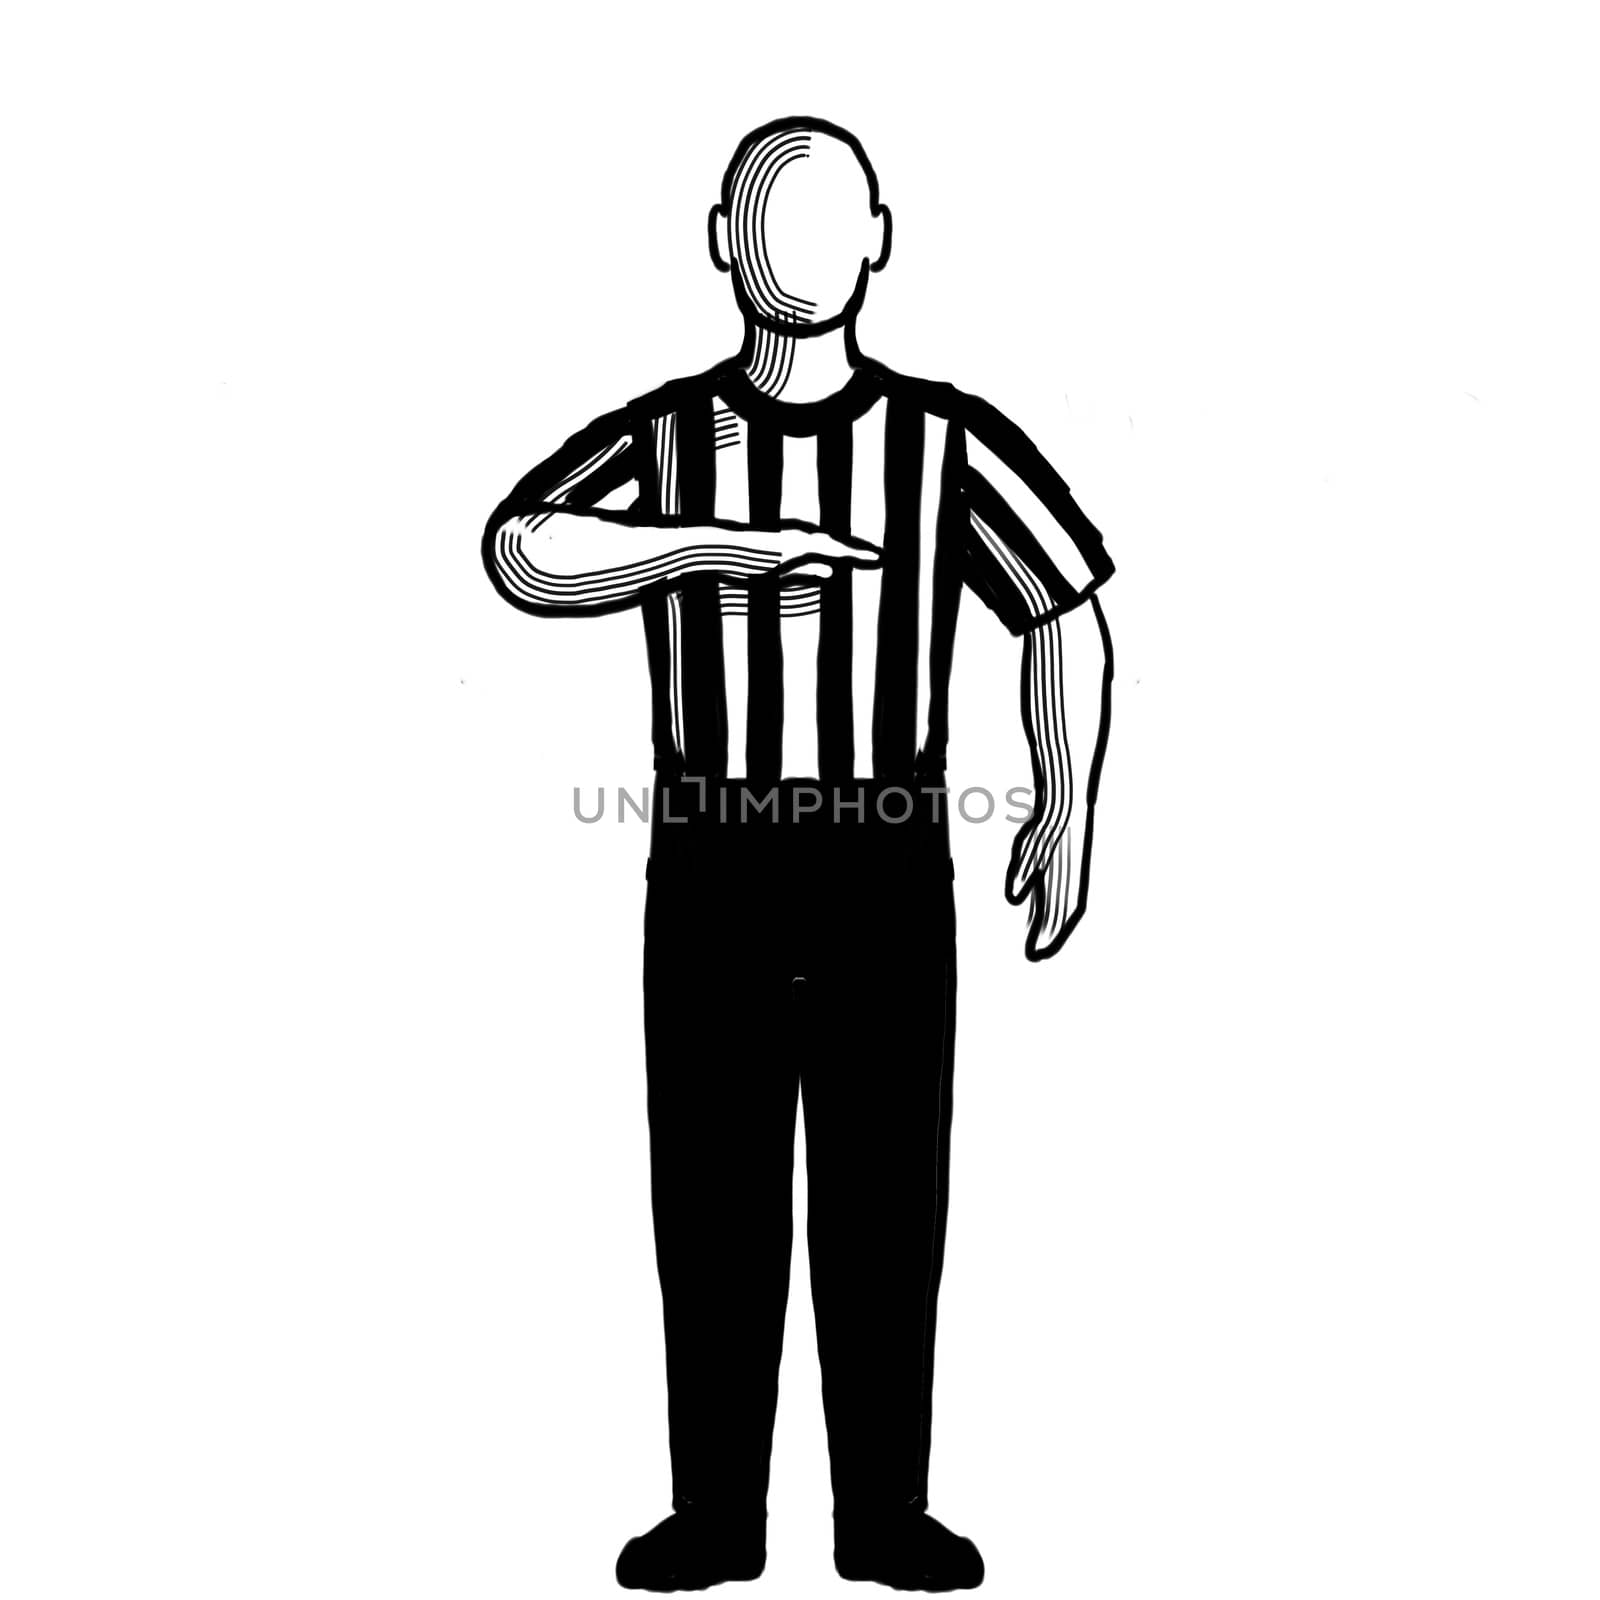 Black and white illustration of a basketball referee or official with hand signal showing visible count viewed from front on isolated background done retro style.